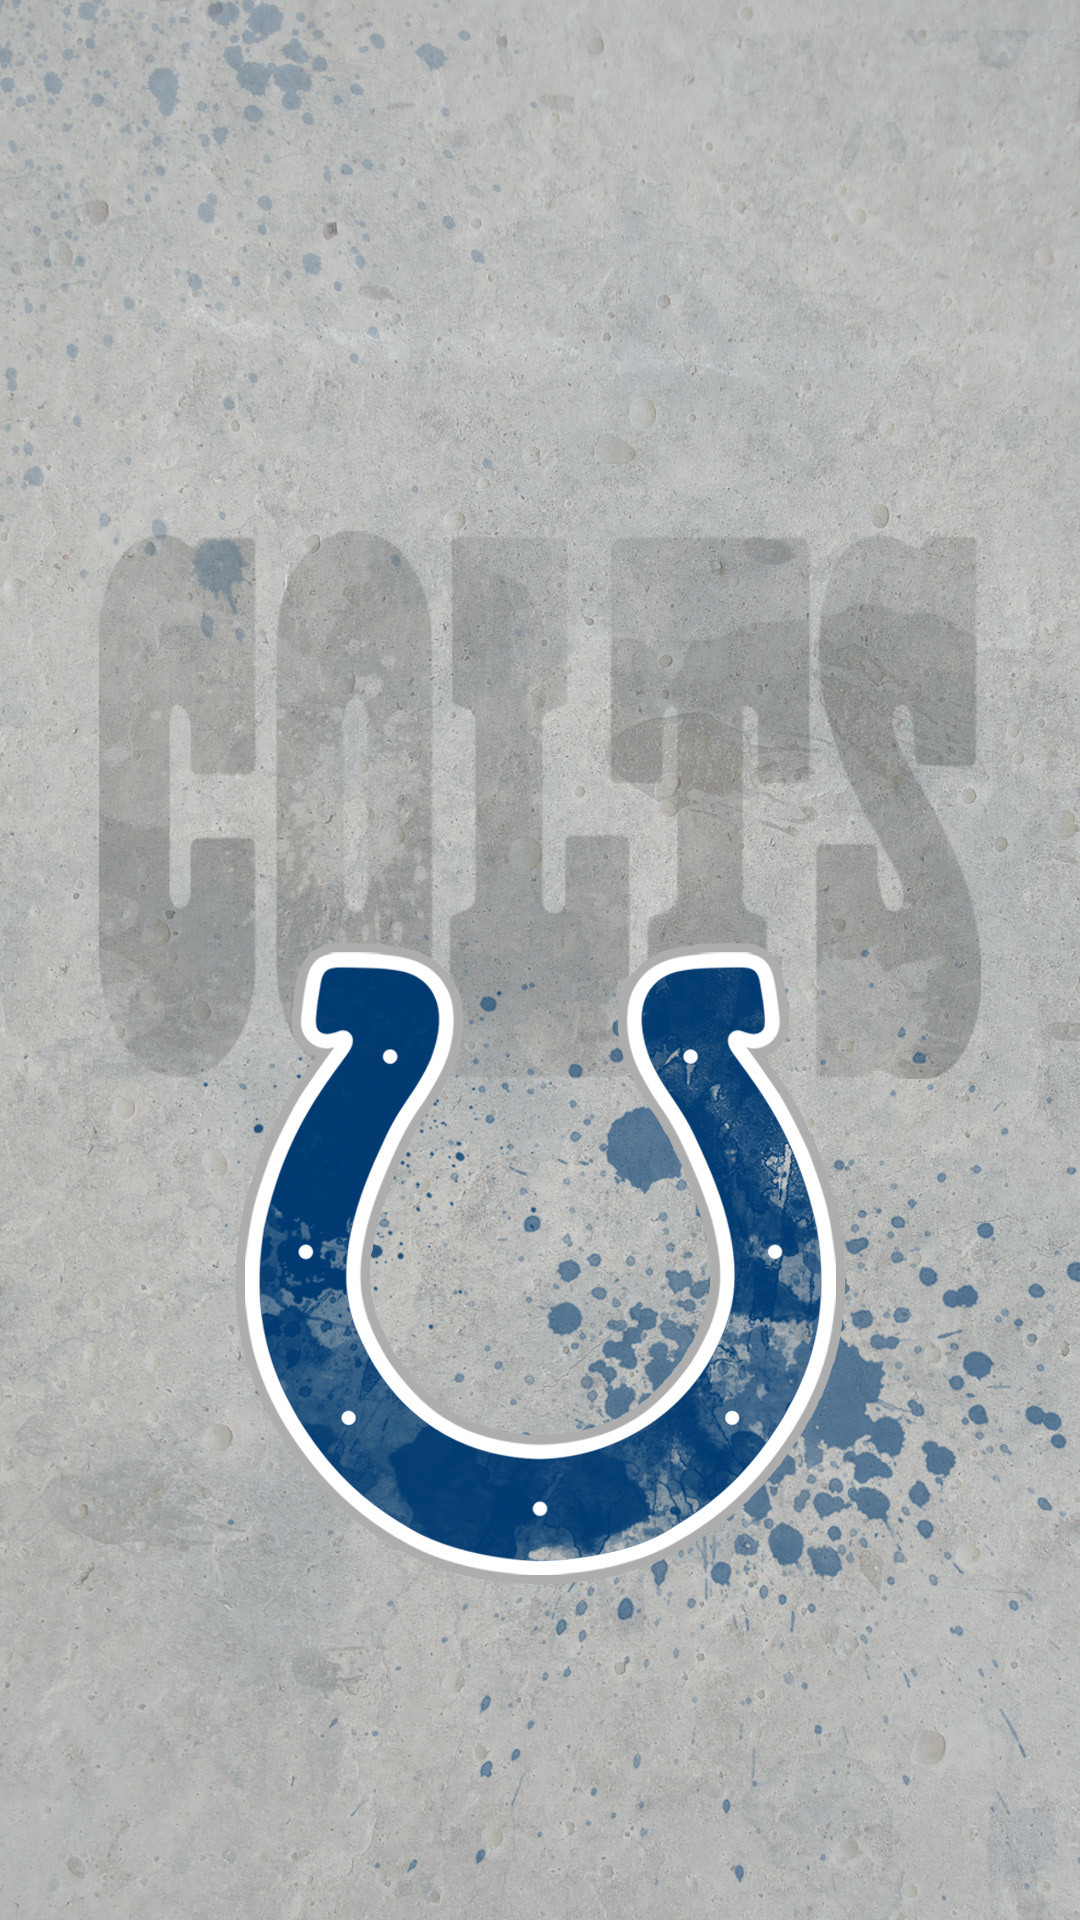 Indianapolis Colts iPhone Wallpaper (74+ images)